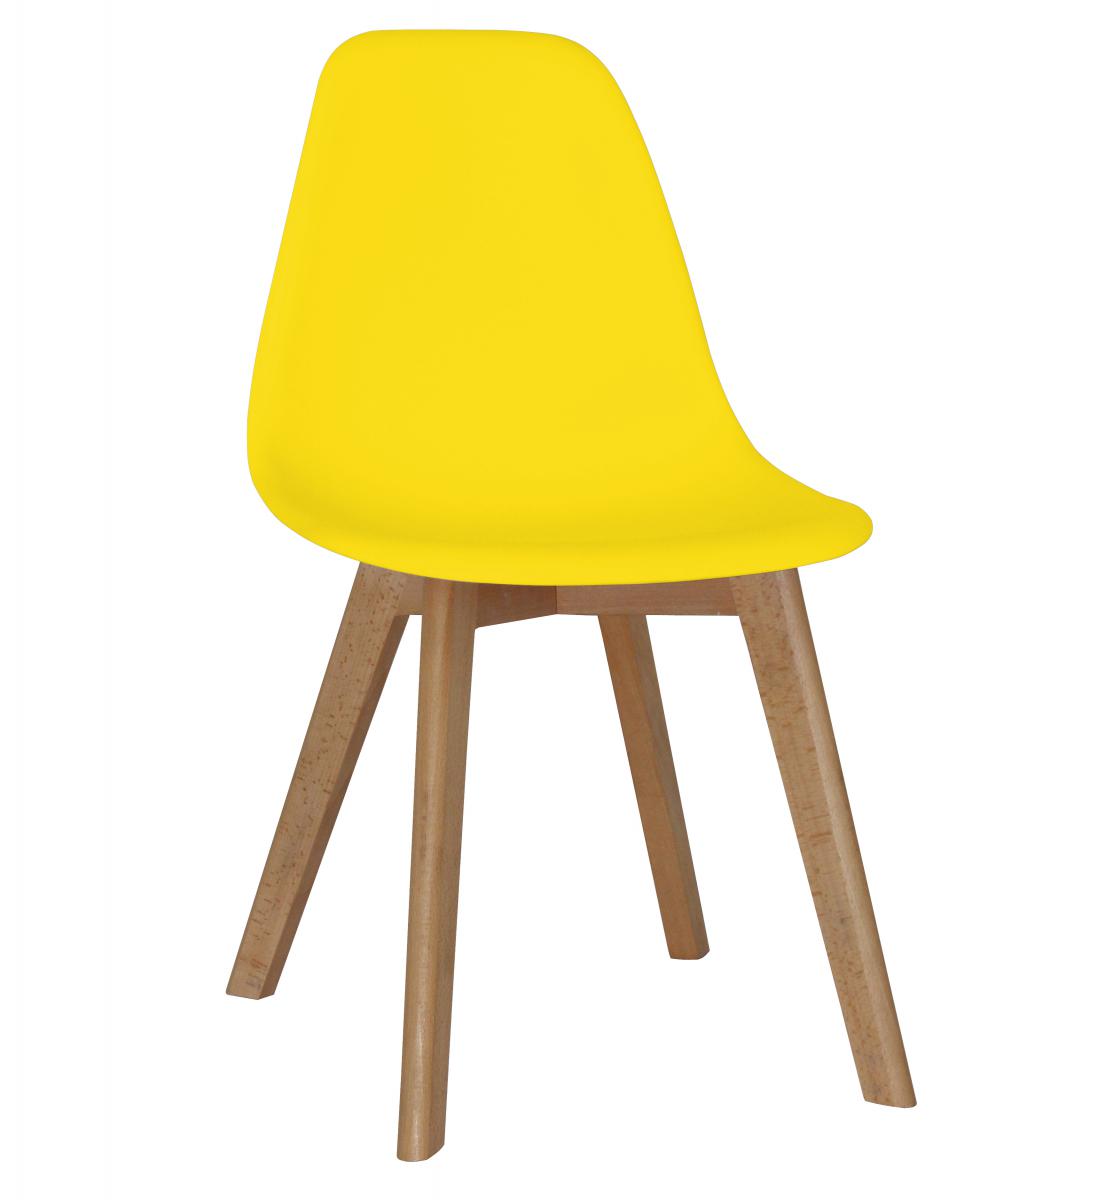 Belgium Plastic (PP) Chairs with Solid Beech Legs Yellow